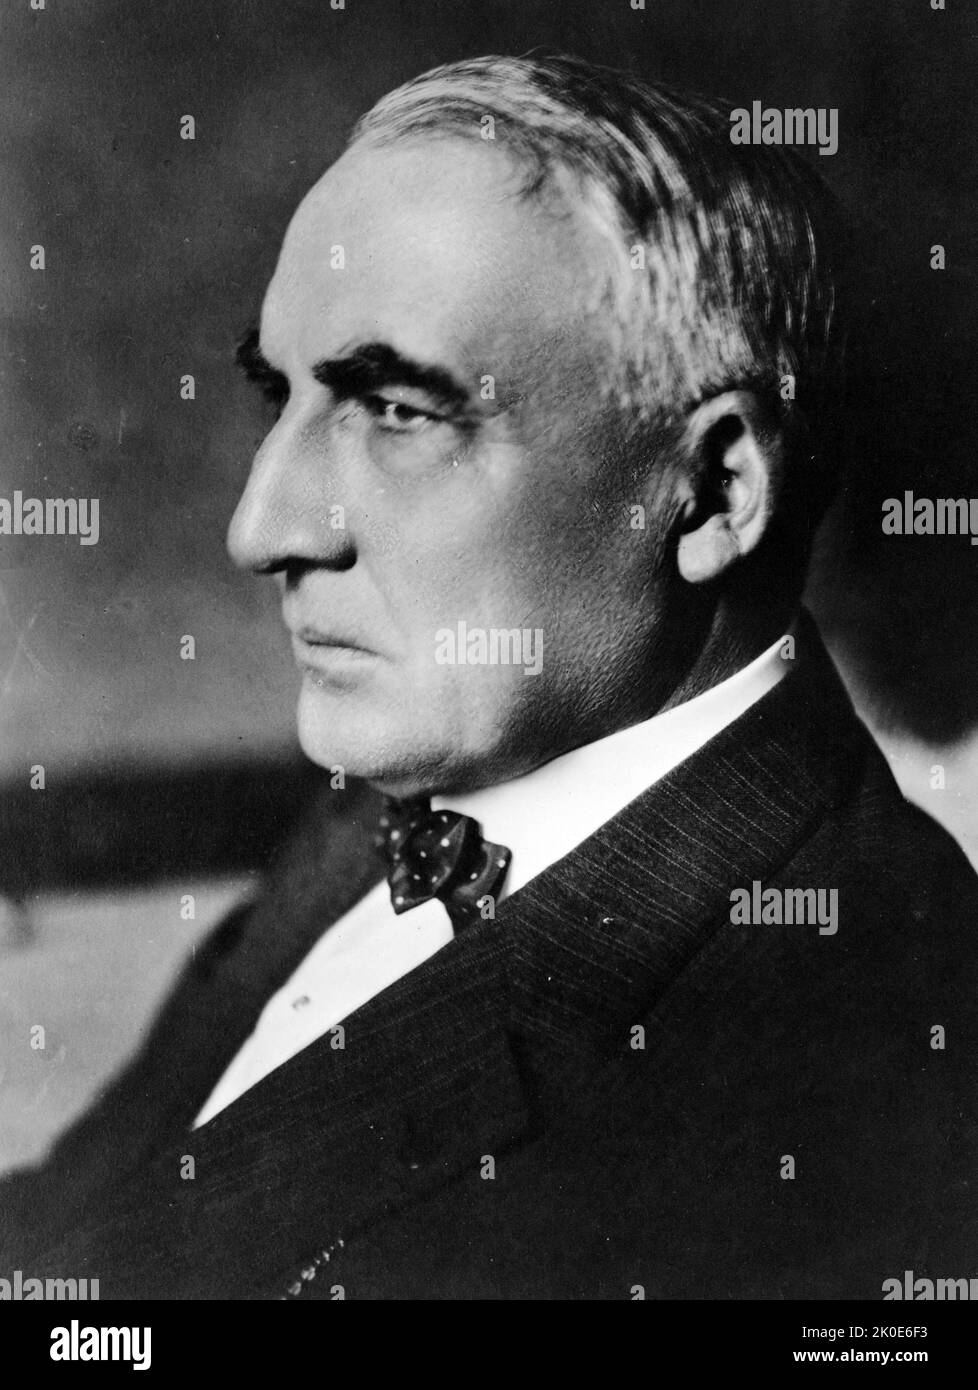 Warren Gamaliel Harding (November 2, 1865 - August 2, 1923) was the 29th president of the United States, serving from 1921 until his death in 1923. A member of the Republican Party. Stock Photo